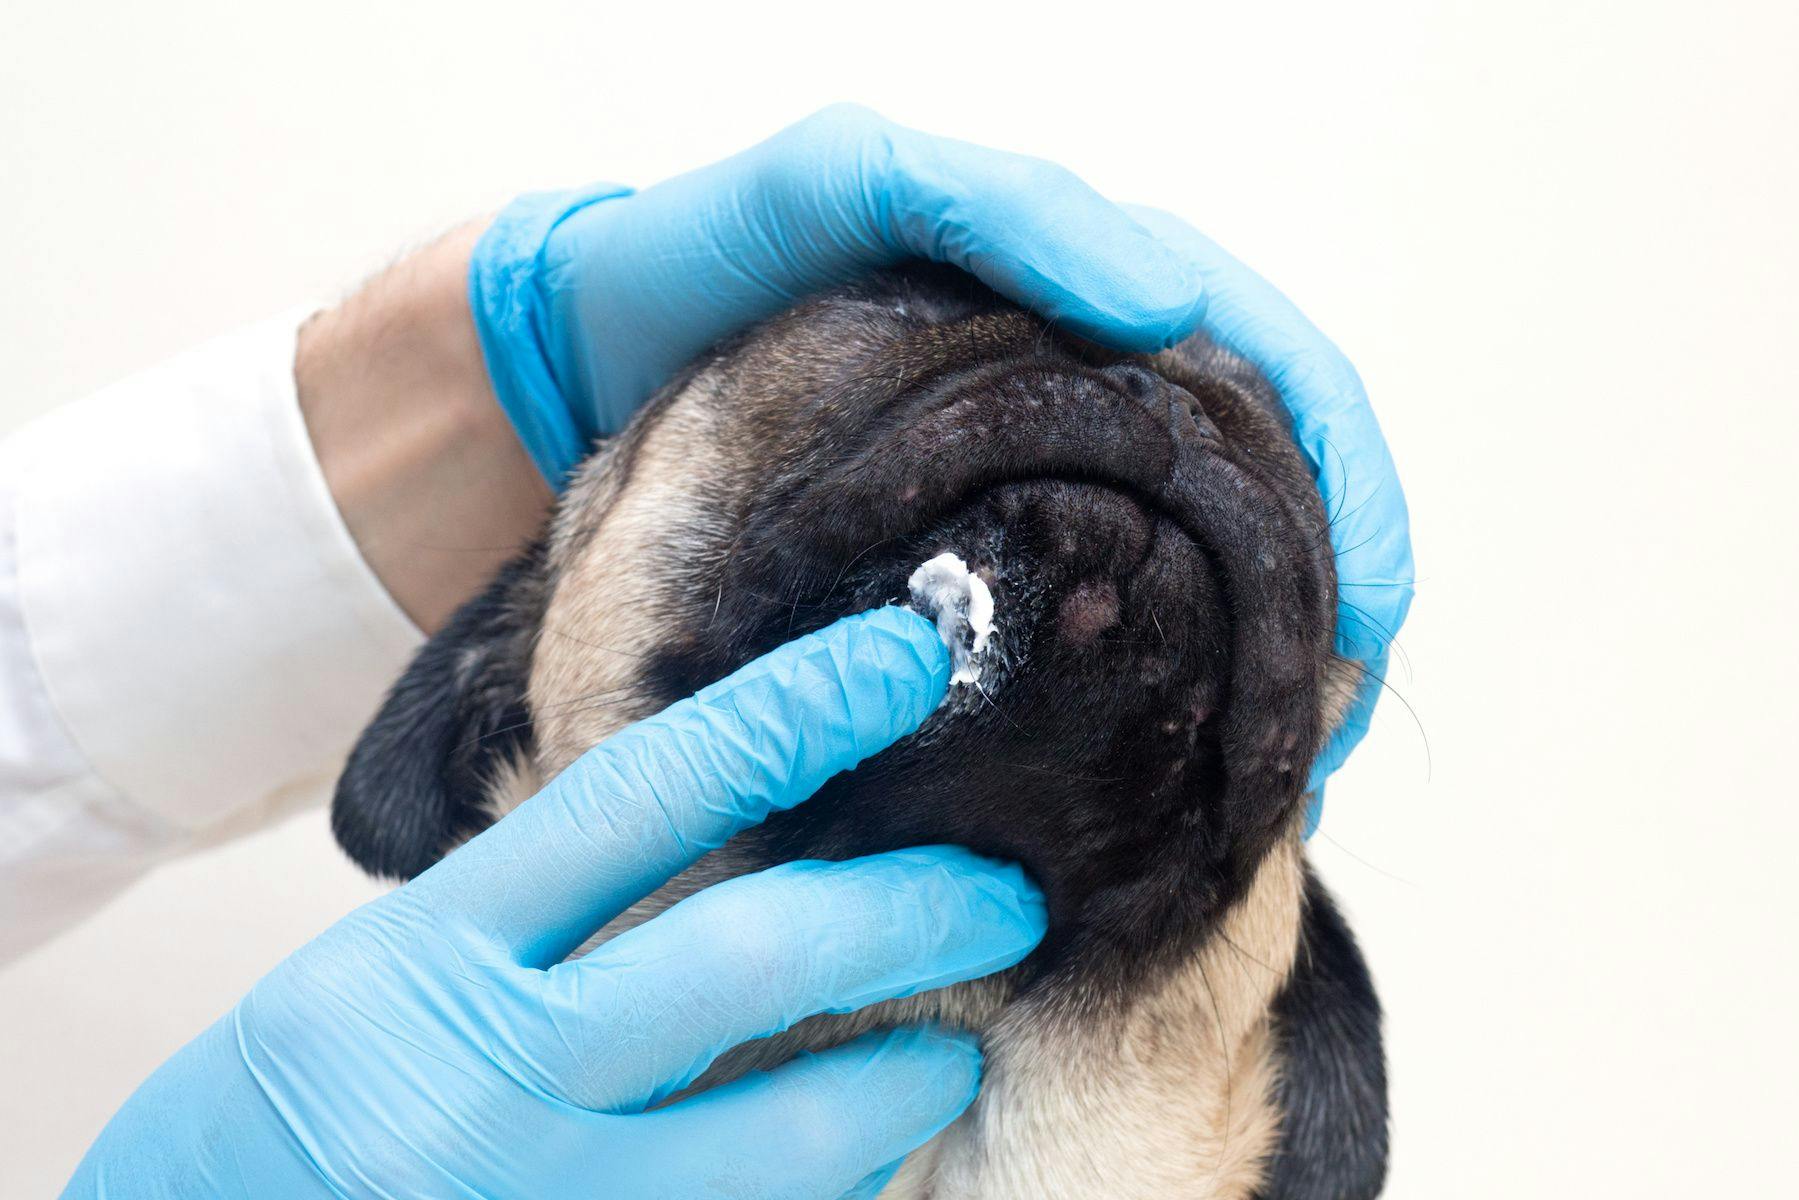 Applying topical treatment to a dog's wound